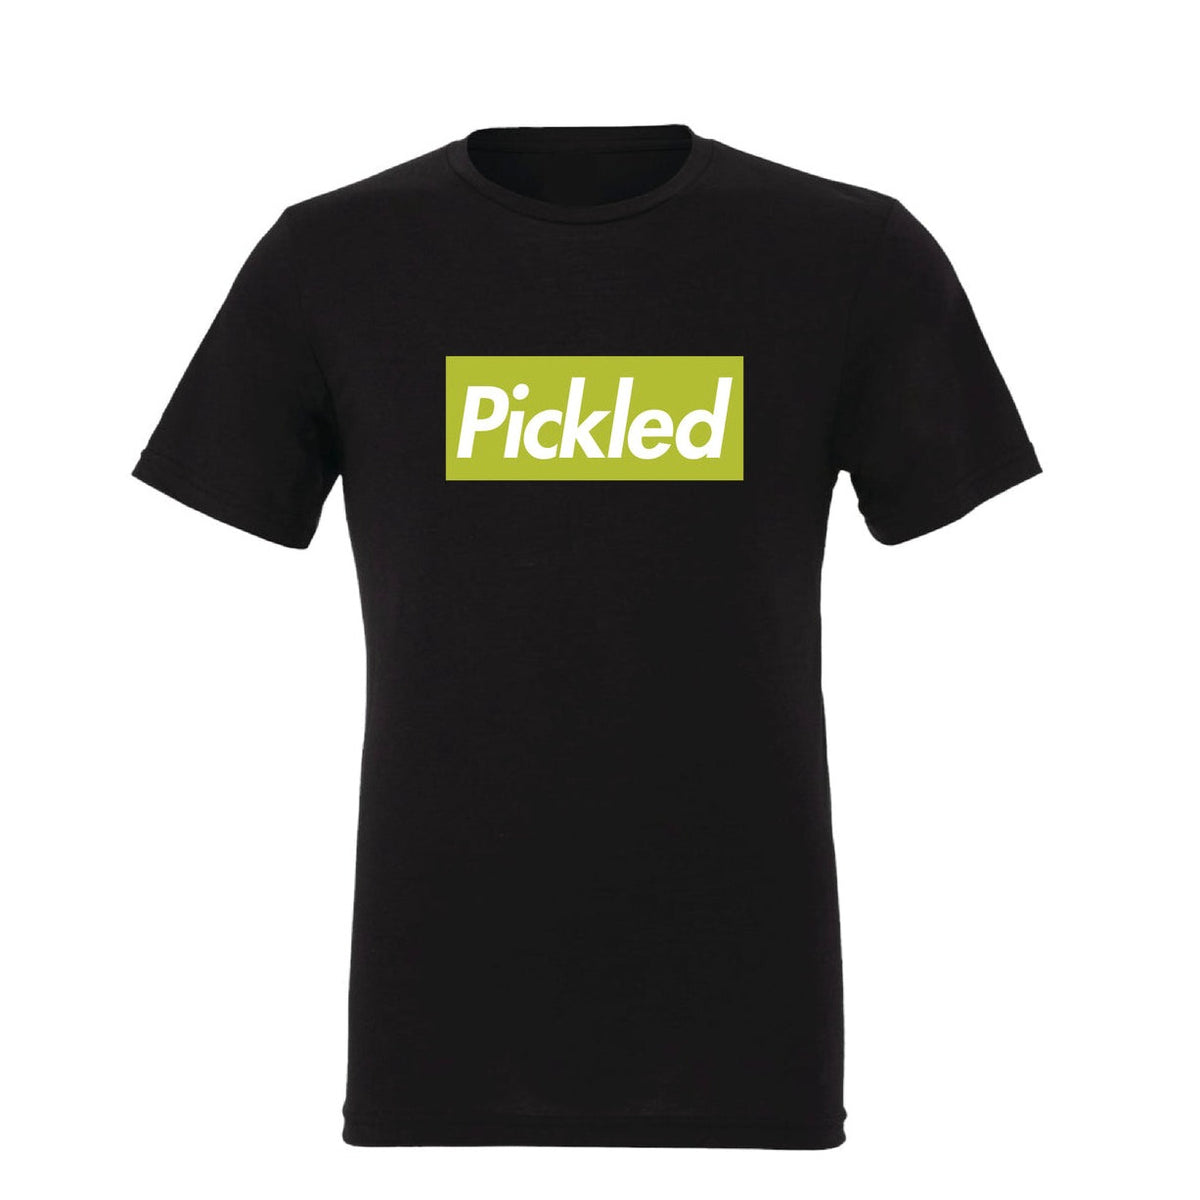 NEW Pickled Performance Favore Tee